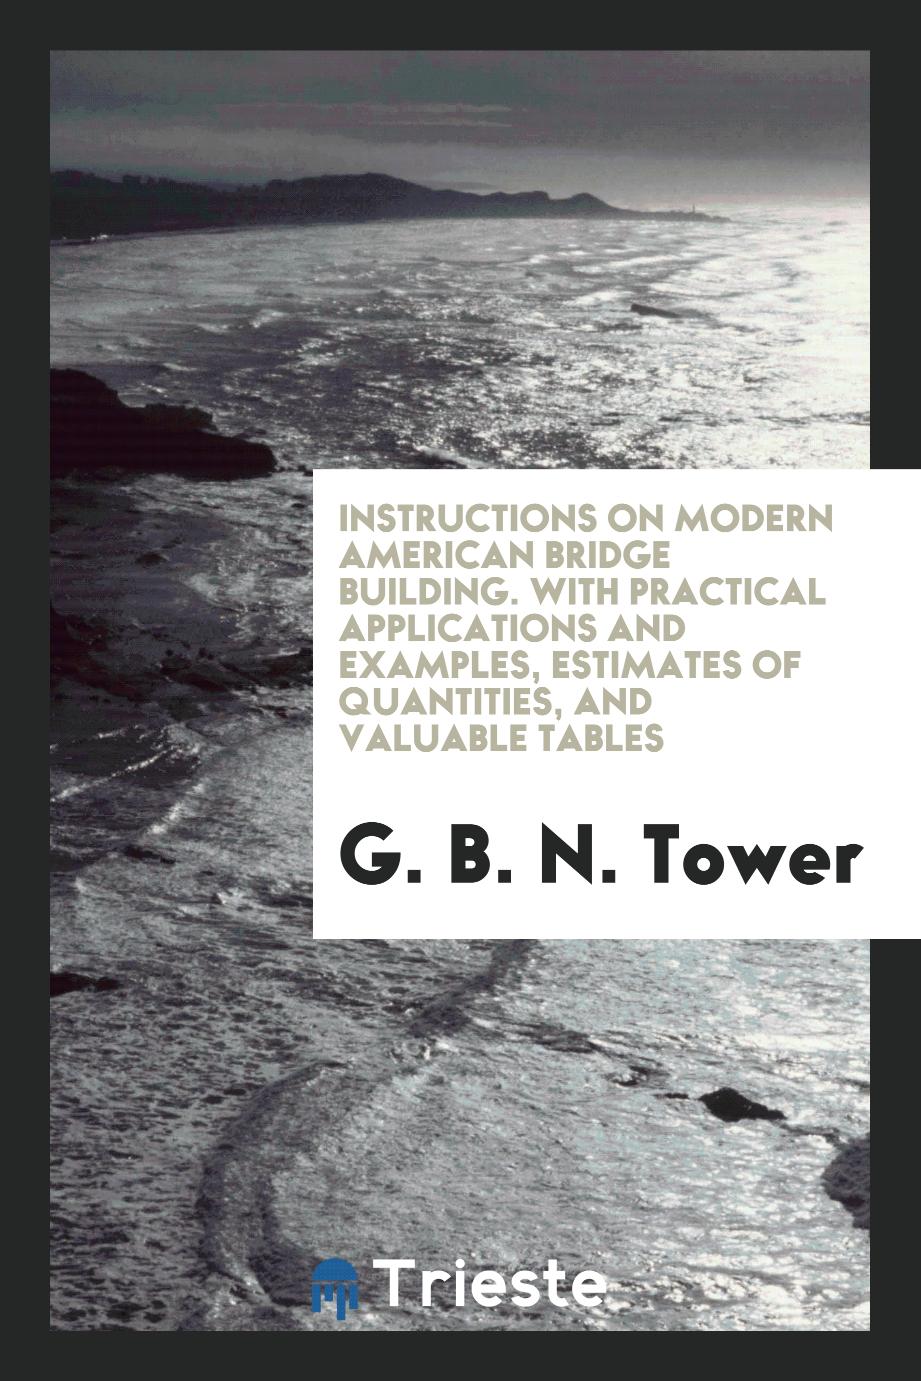 Instructions on modern American bridge building. With practical applications and examples, estimates of quantities, and valuable tables